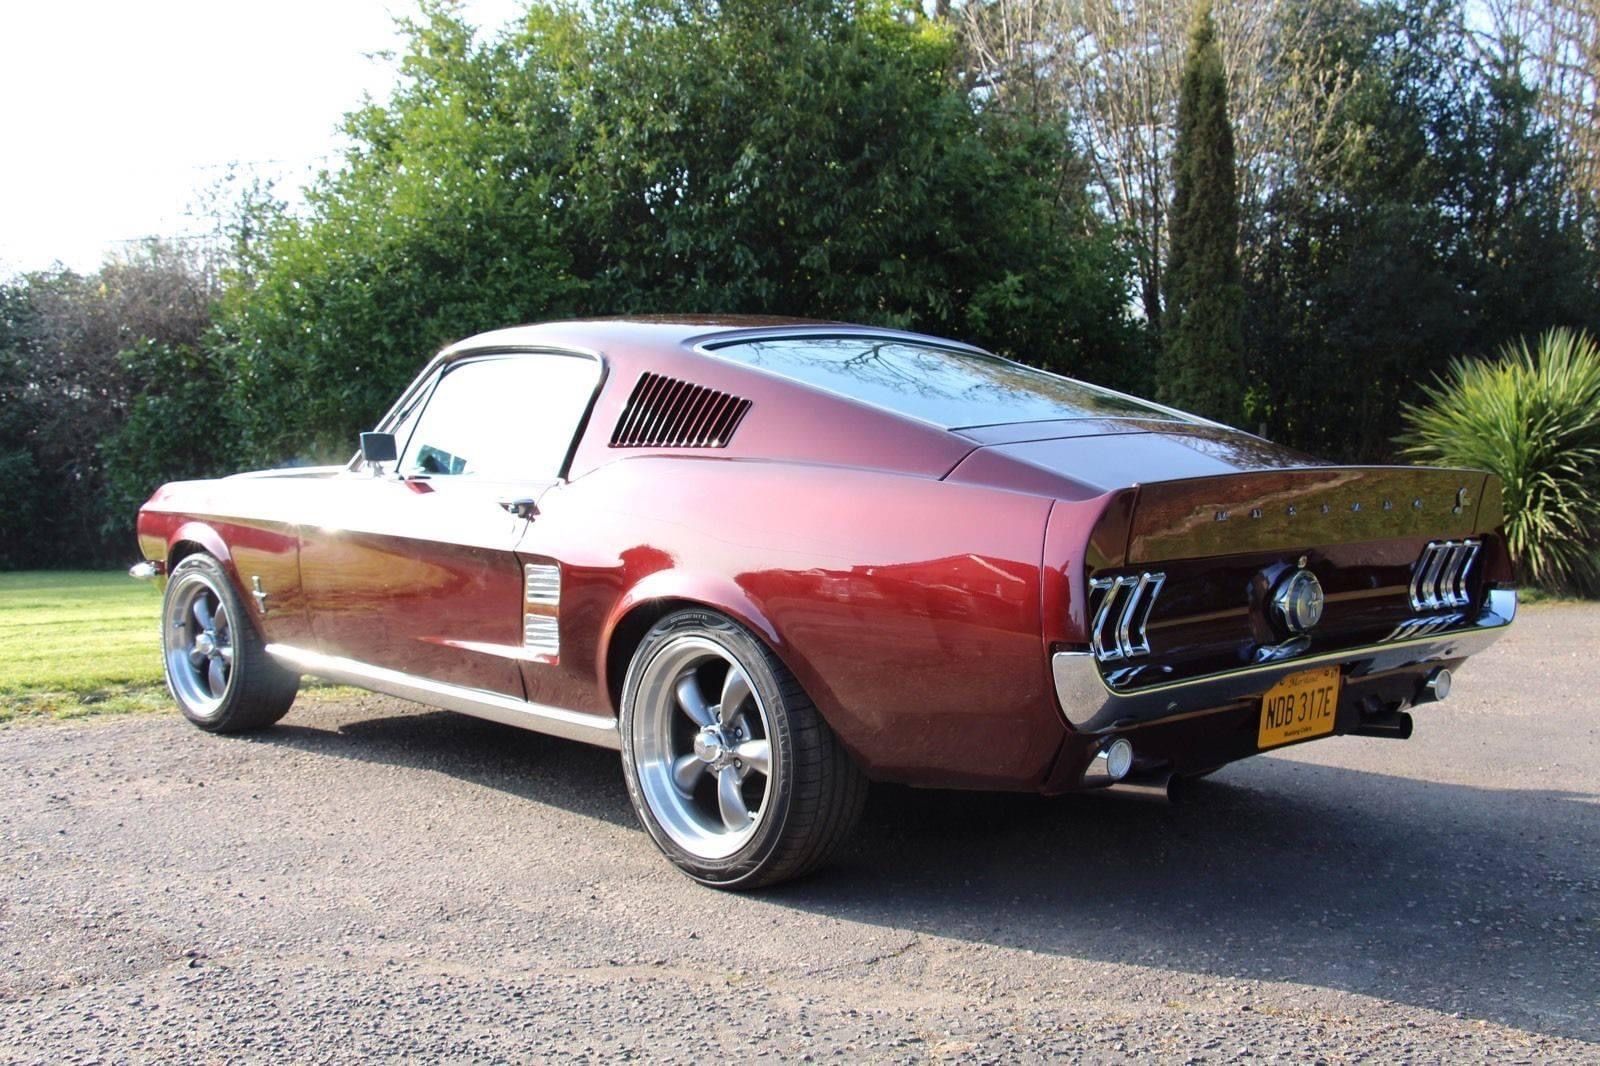 This Is The Best Feature Of The 1967 Ford Mustang Fastback